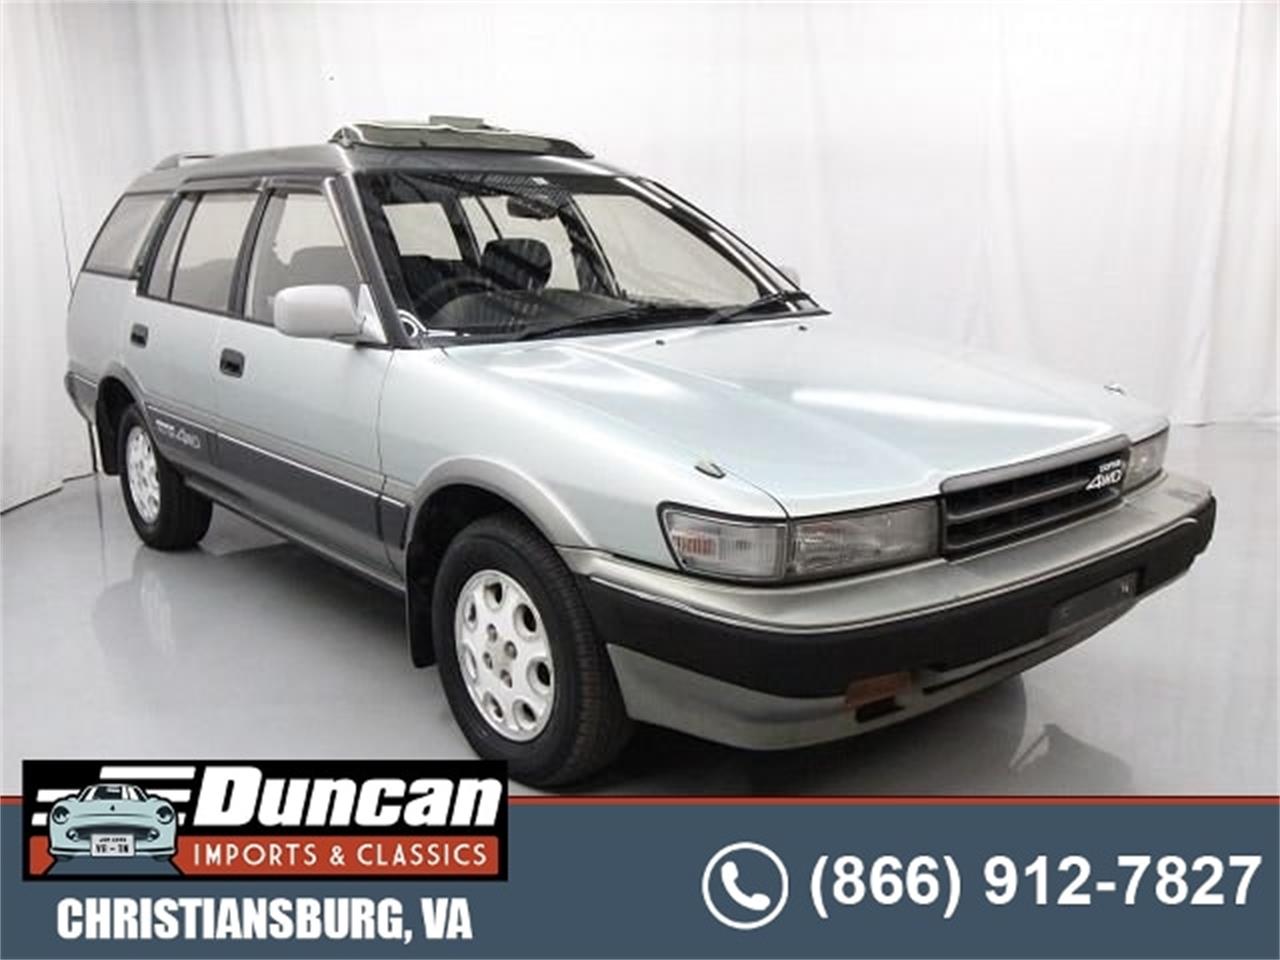 For Sale: 1990 Toyota Sprinter in Christiansburg, Virginia for sale in Christiansburg, VA